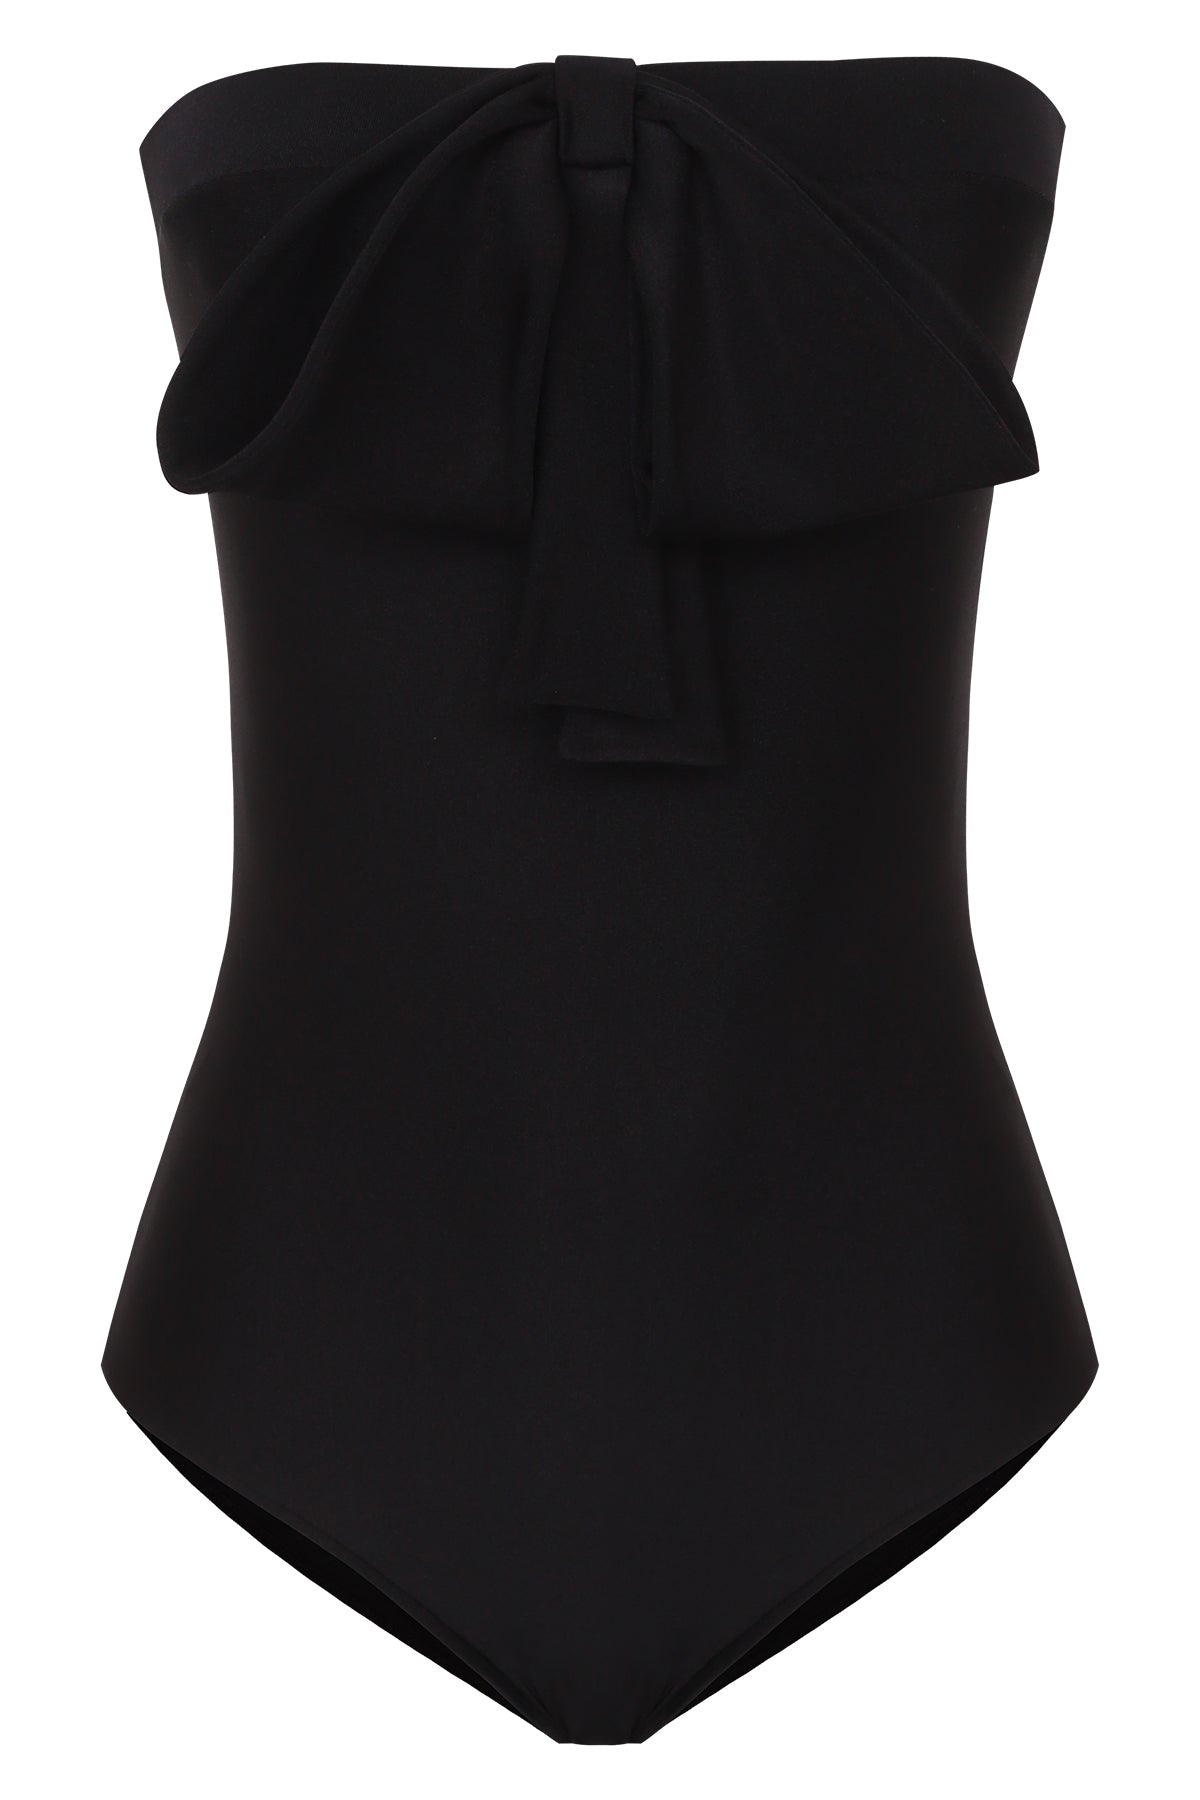 Bain Couture Black Strapless Swimsuit Product